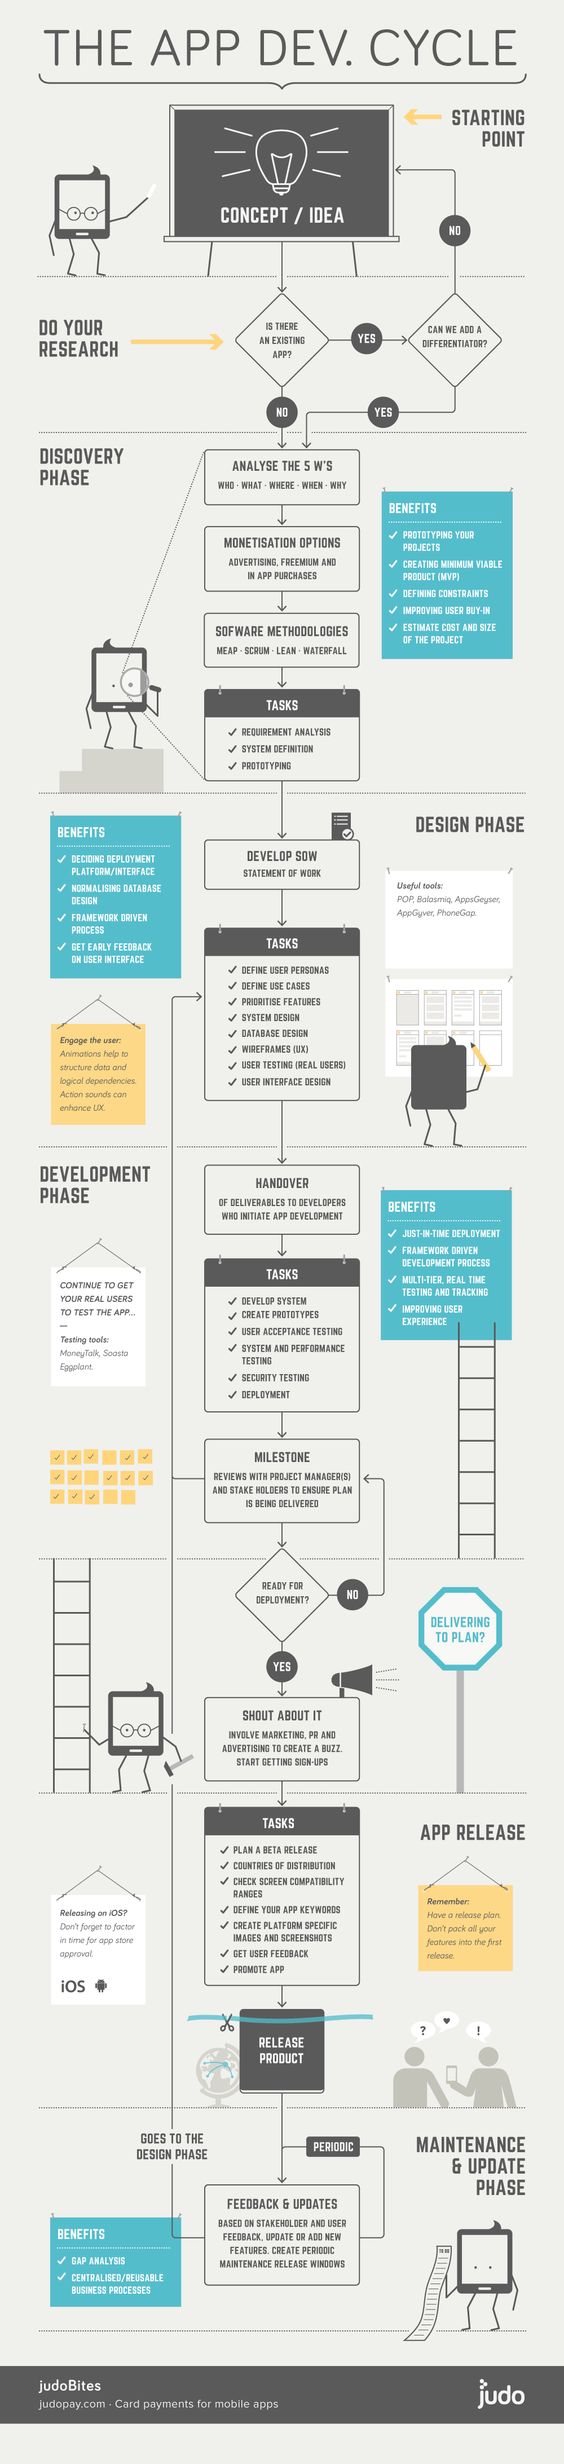 Website Design And Development: Process, Cost, Time And Benefits 